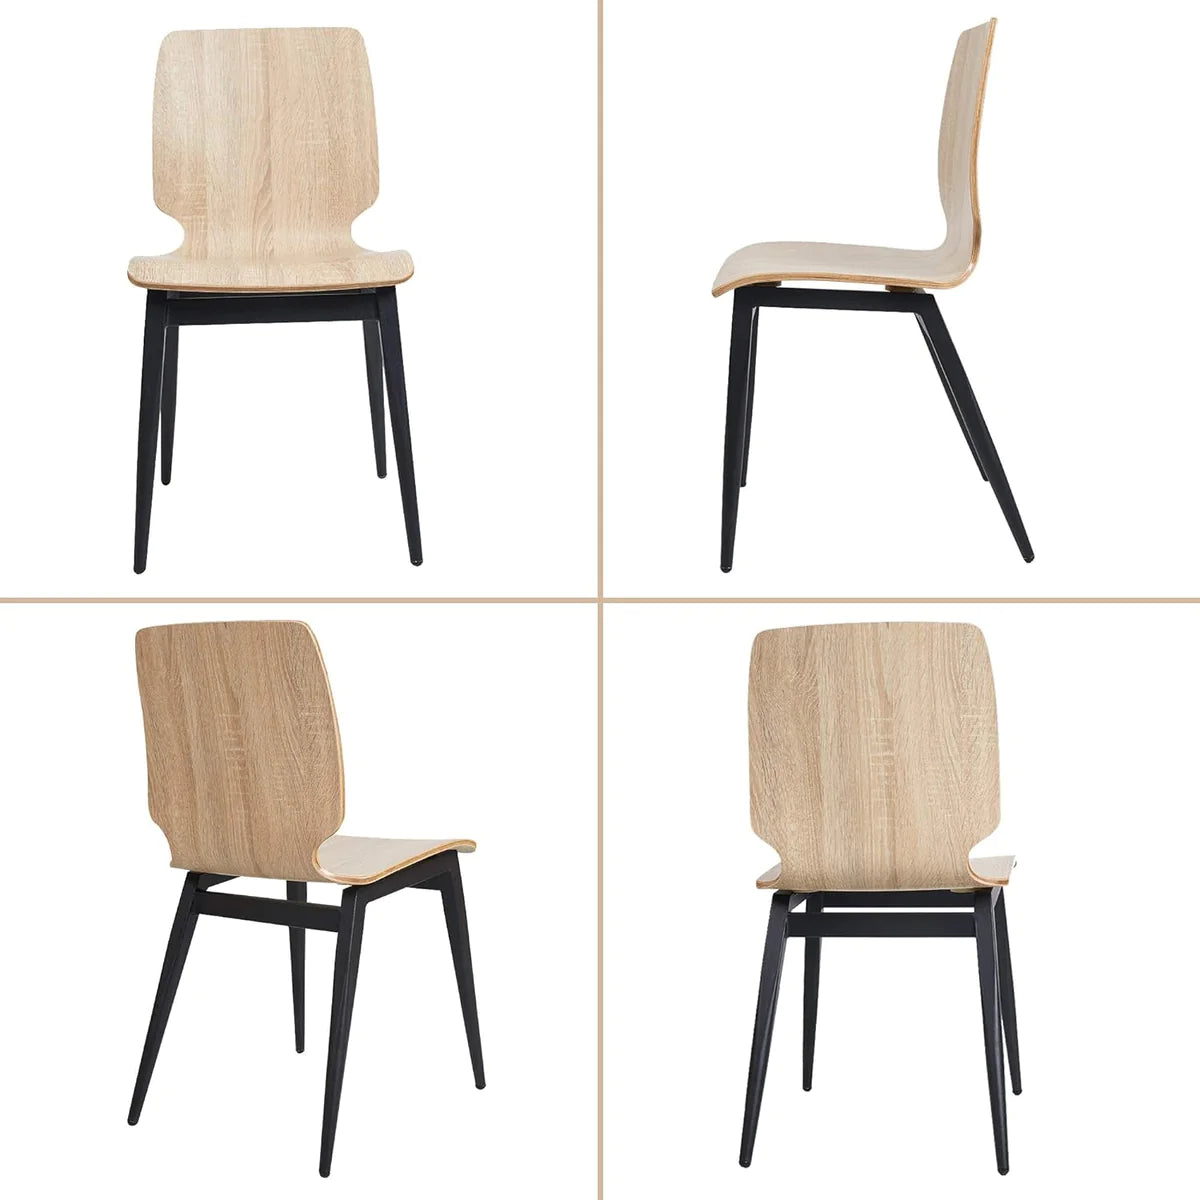 4 Set of  Modern Kitchen Chairs with Wooden Seats Metal Legs Dining Side Chair